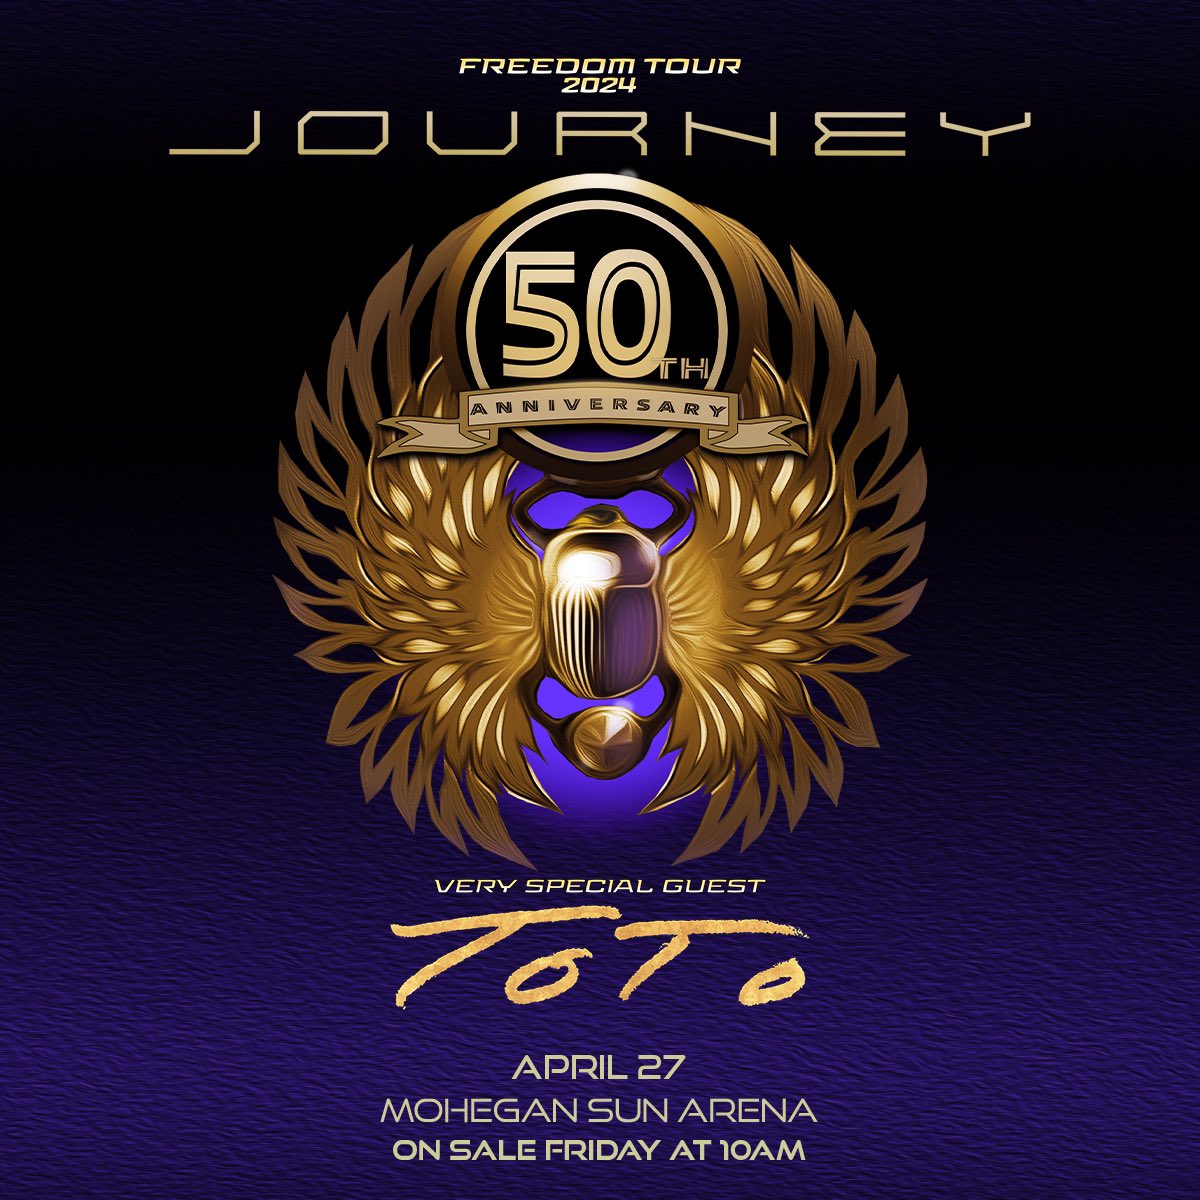 🚨 JUST ANNOUNCED 🚨

Wilkes-Barre! @JourneyOfficial Freedom Tour 2024 is coming to Mohegan Sun Arena at Casey Plaza and we can’t wait to rock out with you! Grab your tickets this Friday at 10AM and get ready to rock all night on April 27th!

#Journey #FreedomTour2024 #Toto